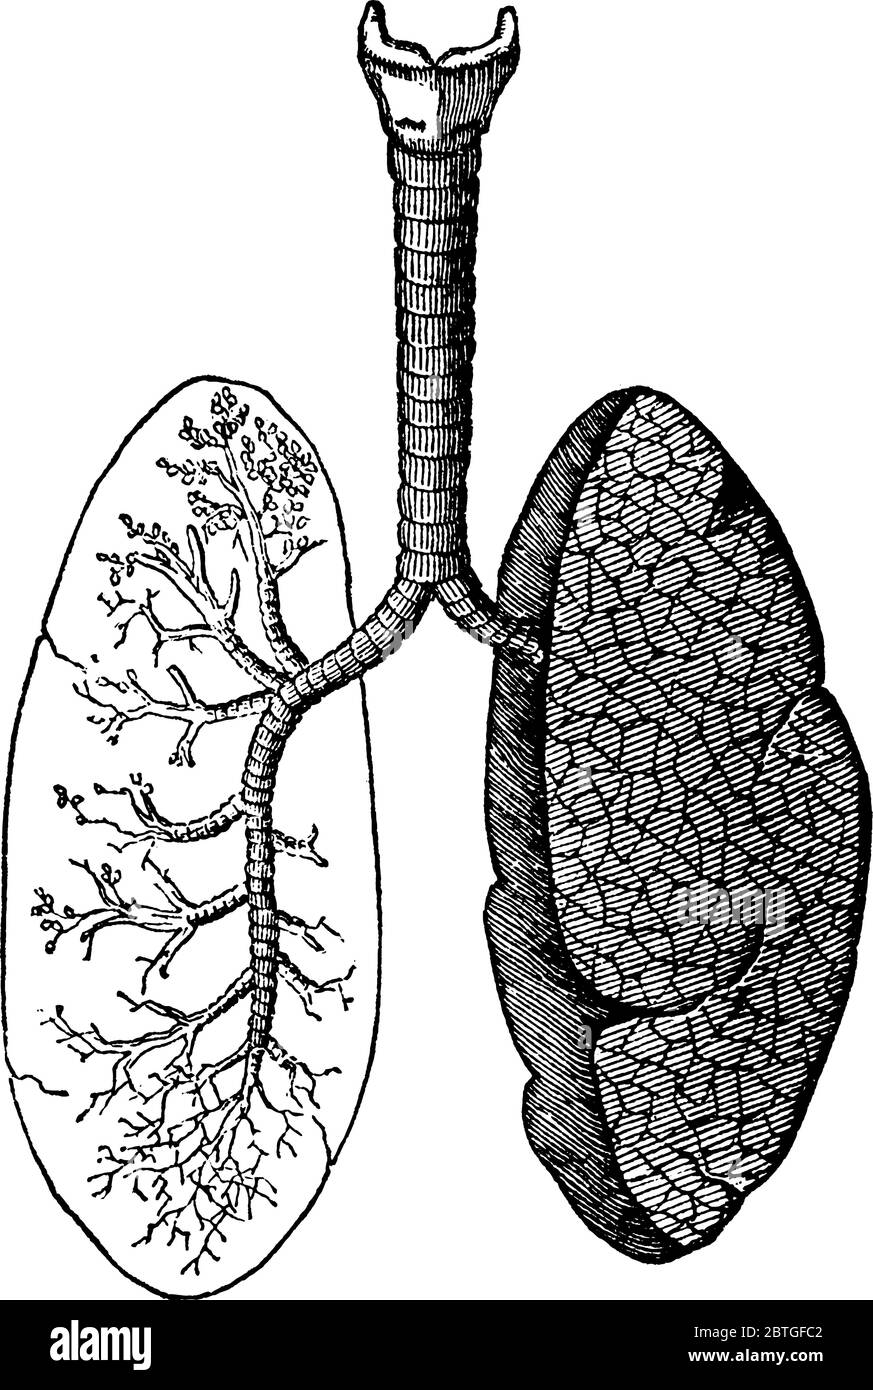 A typical representation of the lungs and air-passages, the primary organs of the respiratory system in human beings and animals, vintage line drawing Stock Vector